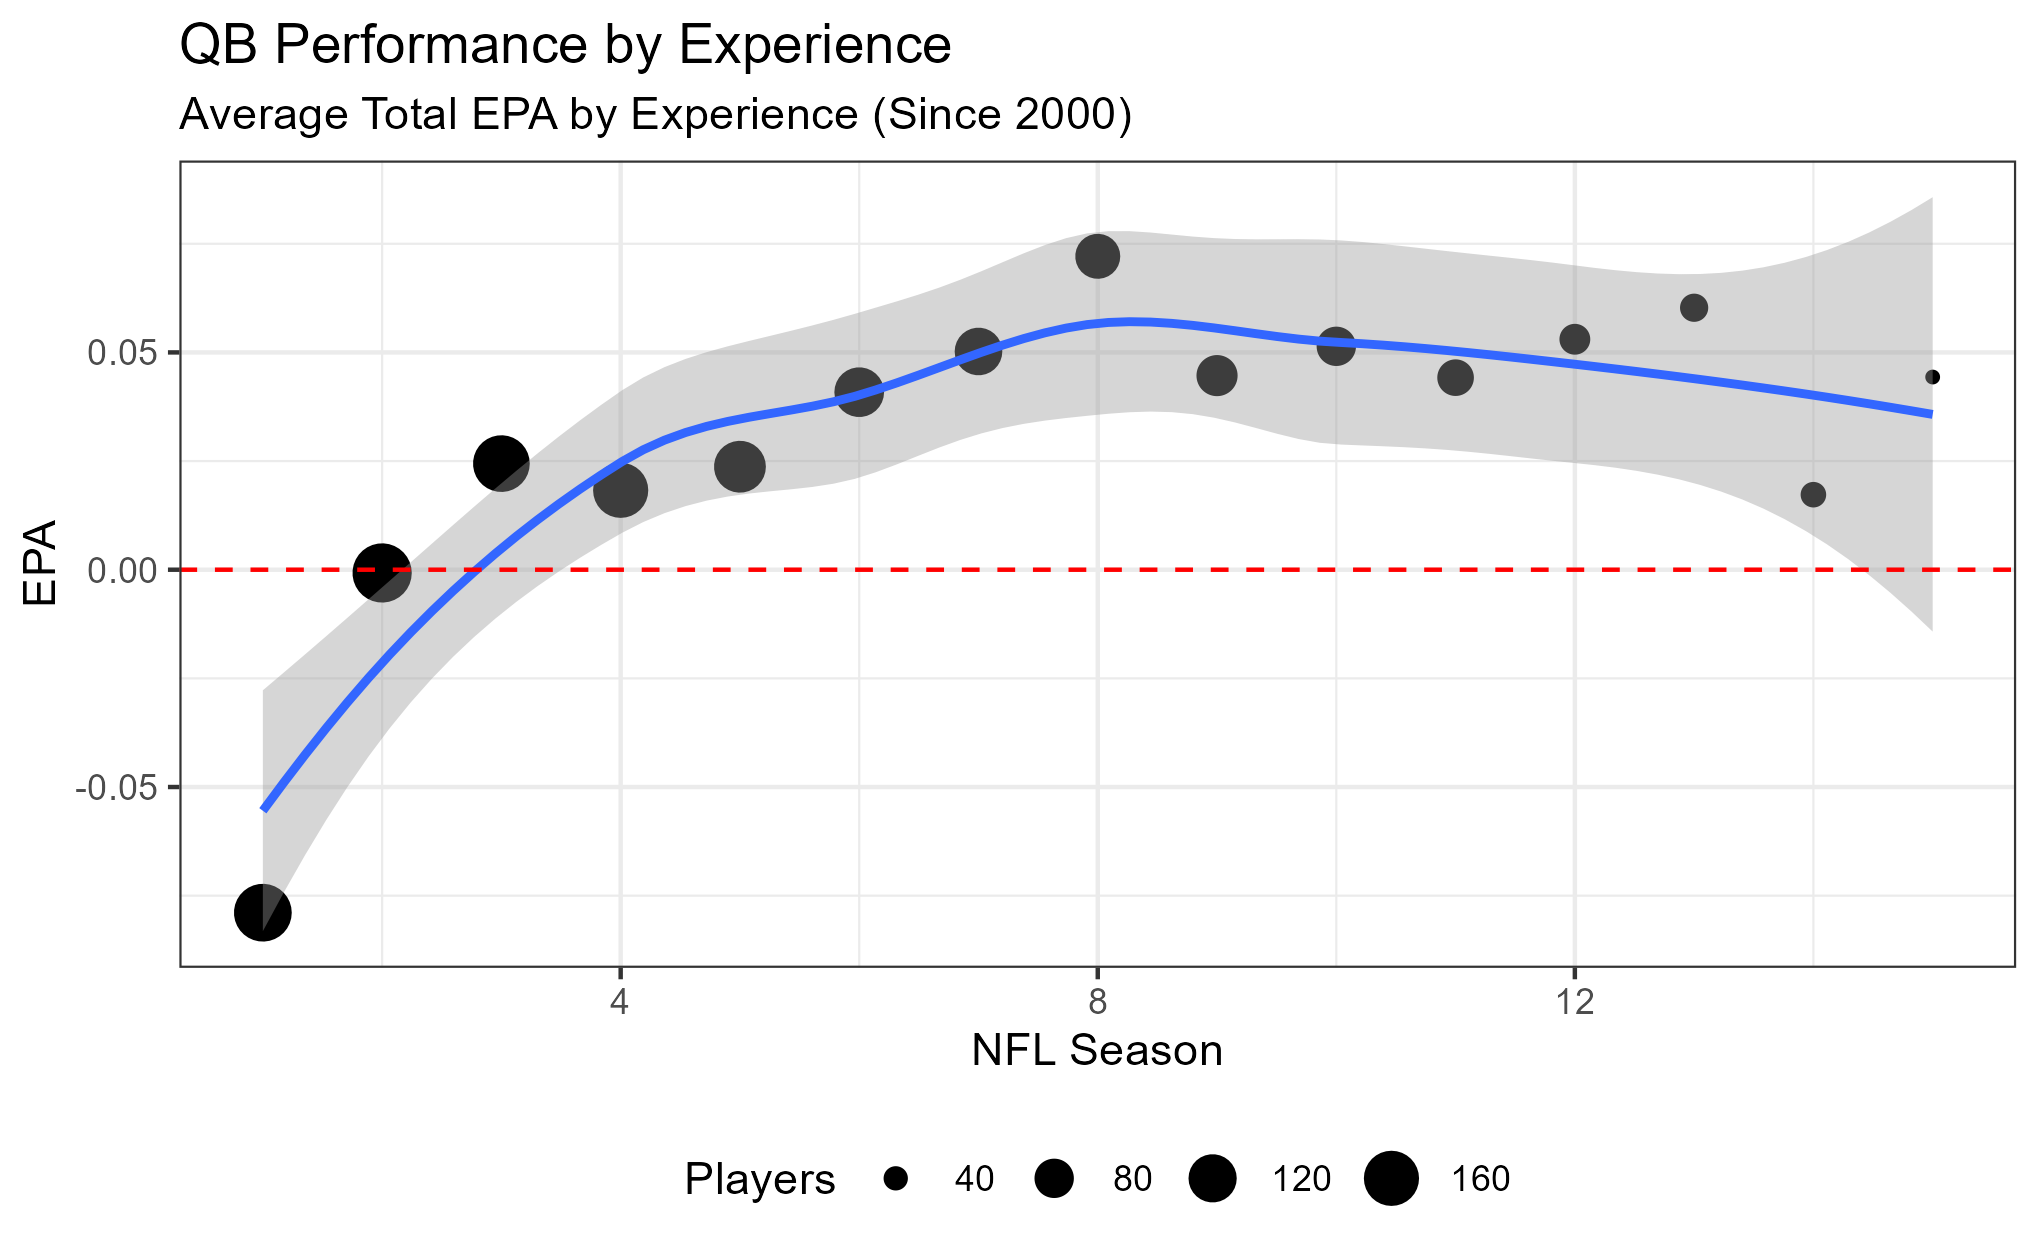 Chart showing QB Performance by Experience, EPA over Seasons